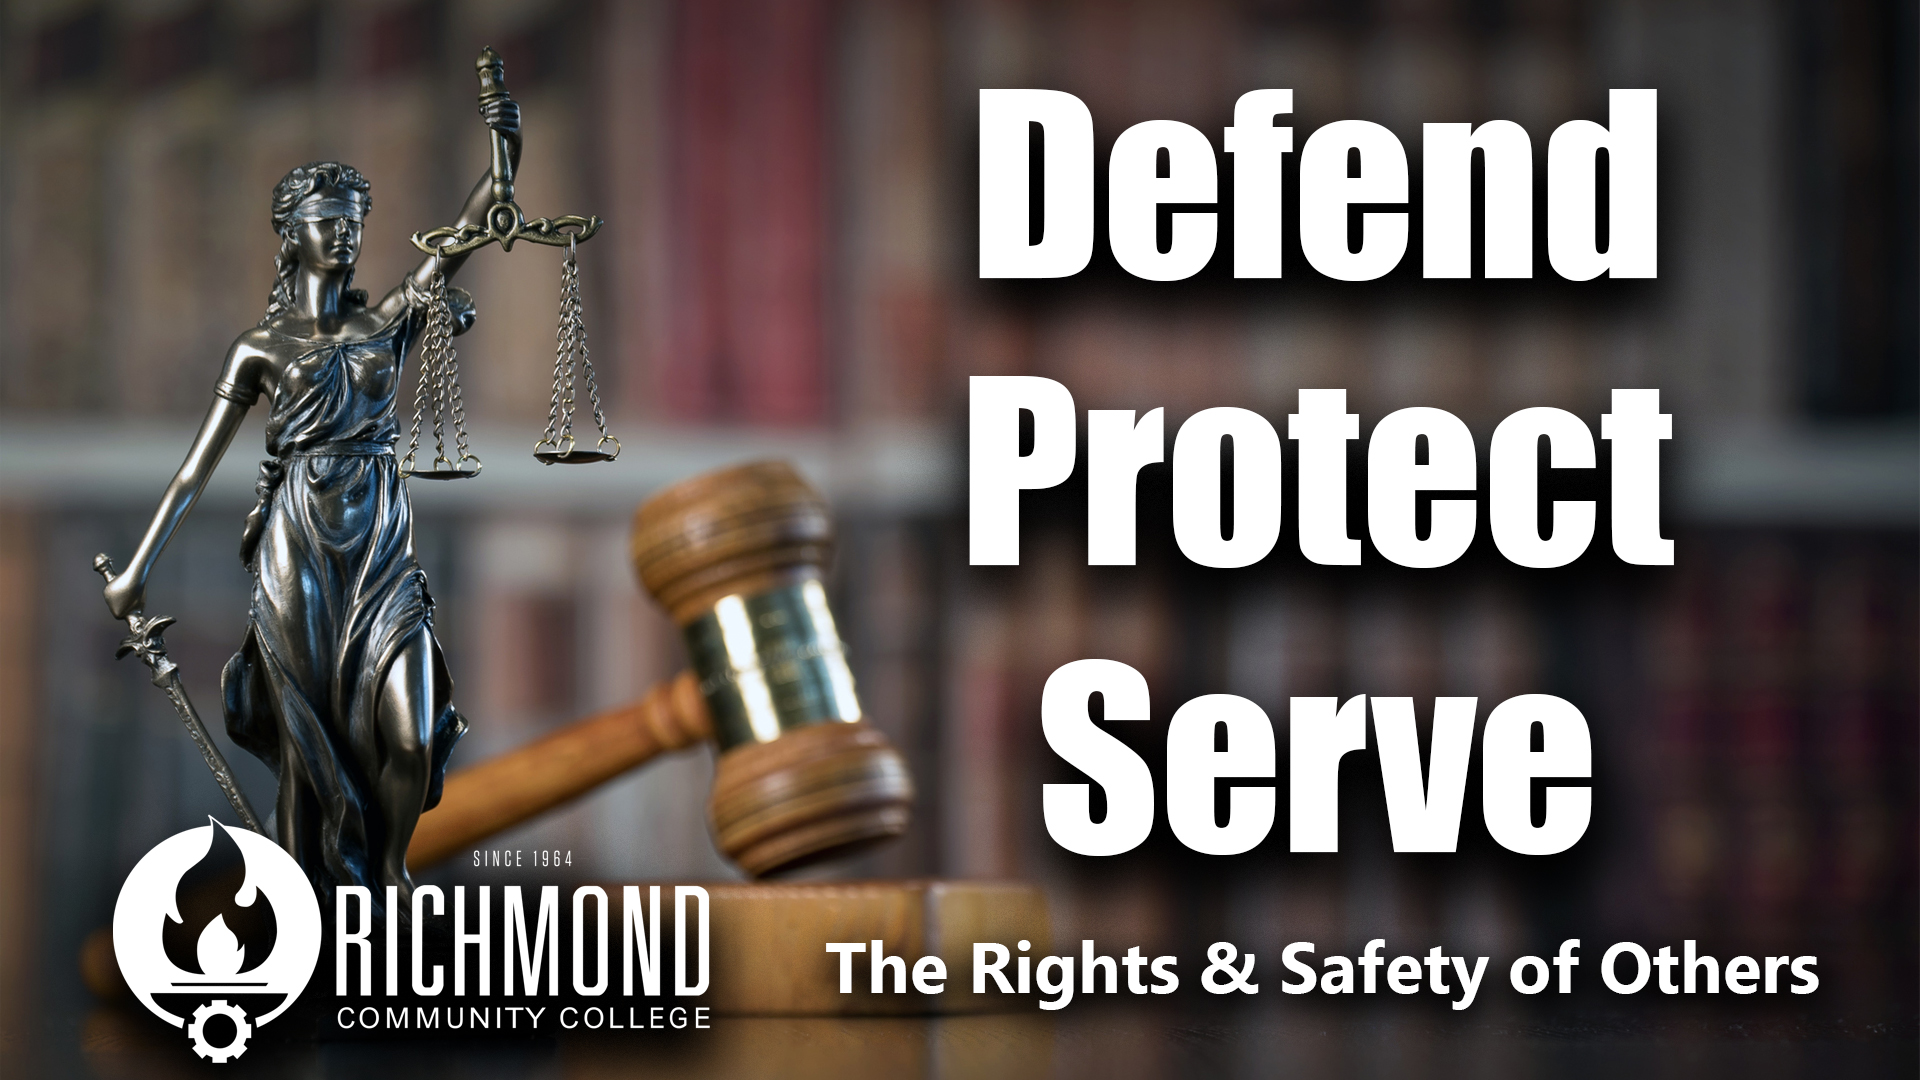 Photo of lady justice statue and court gavel with the words "Defend, Protect, Serve the Safety & Rights of Others," plus the RCC logo.